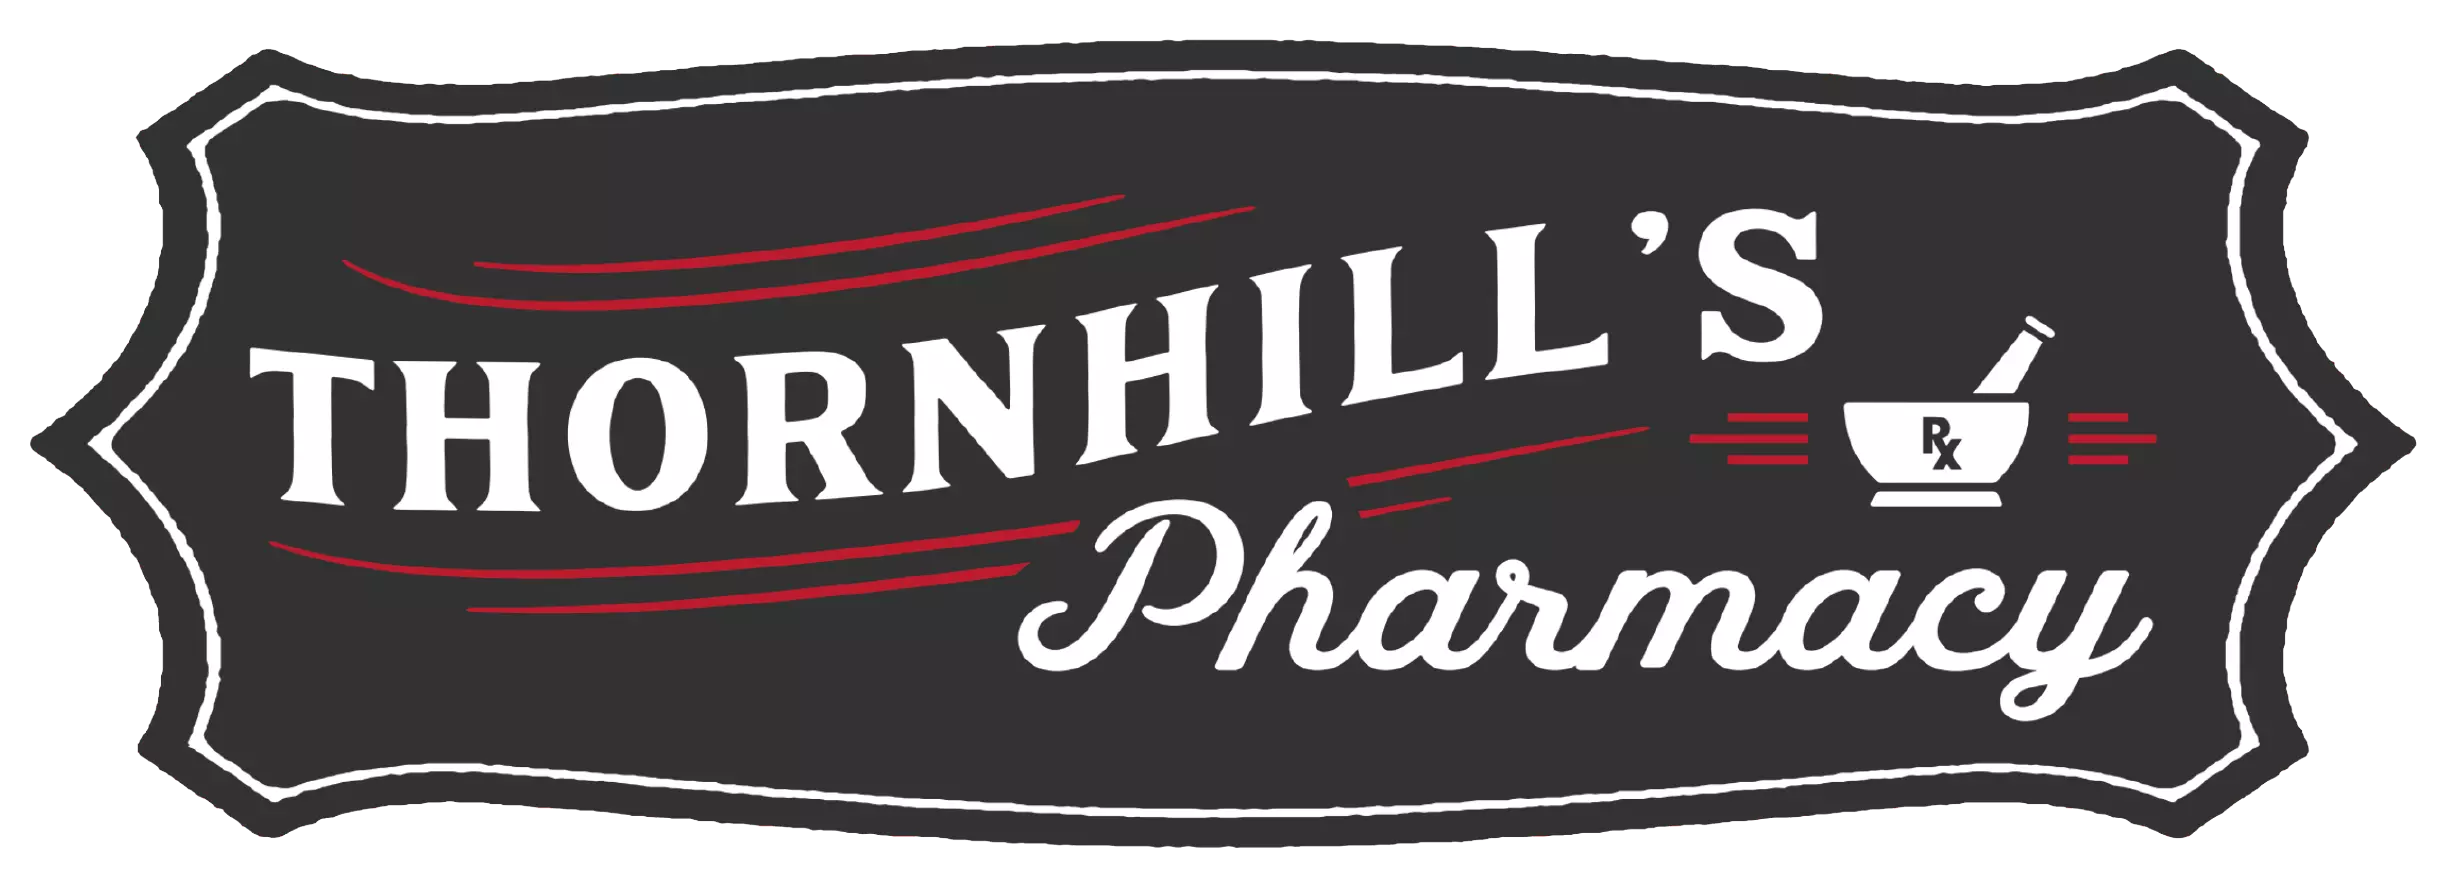 Thornhill's Pharmacy in Texas